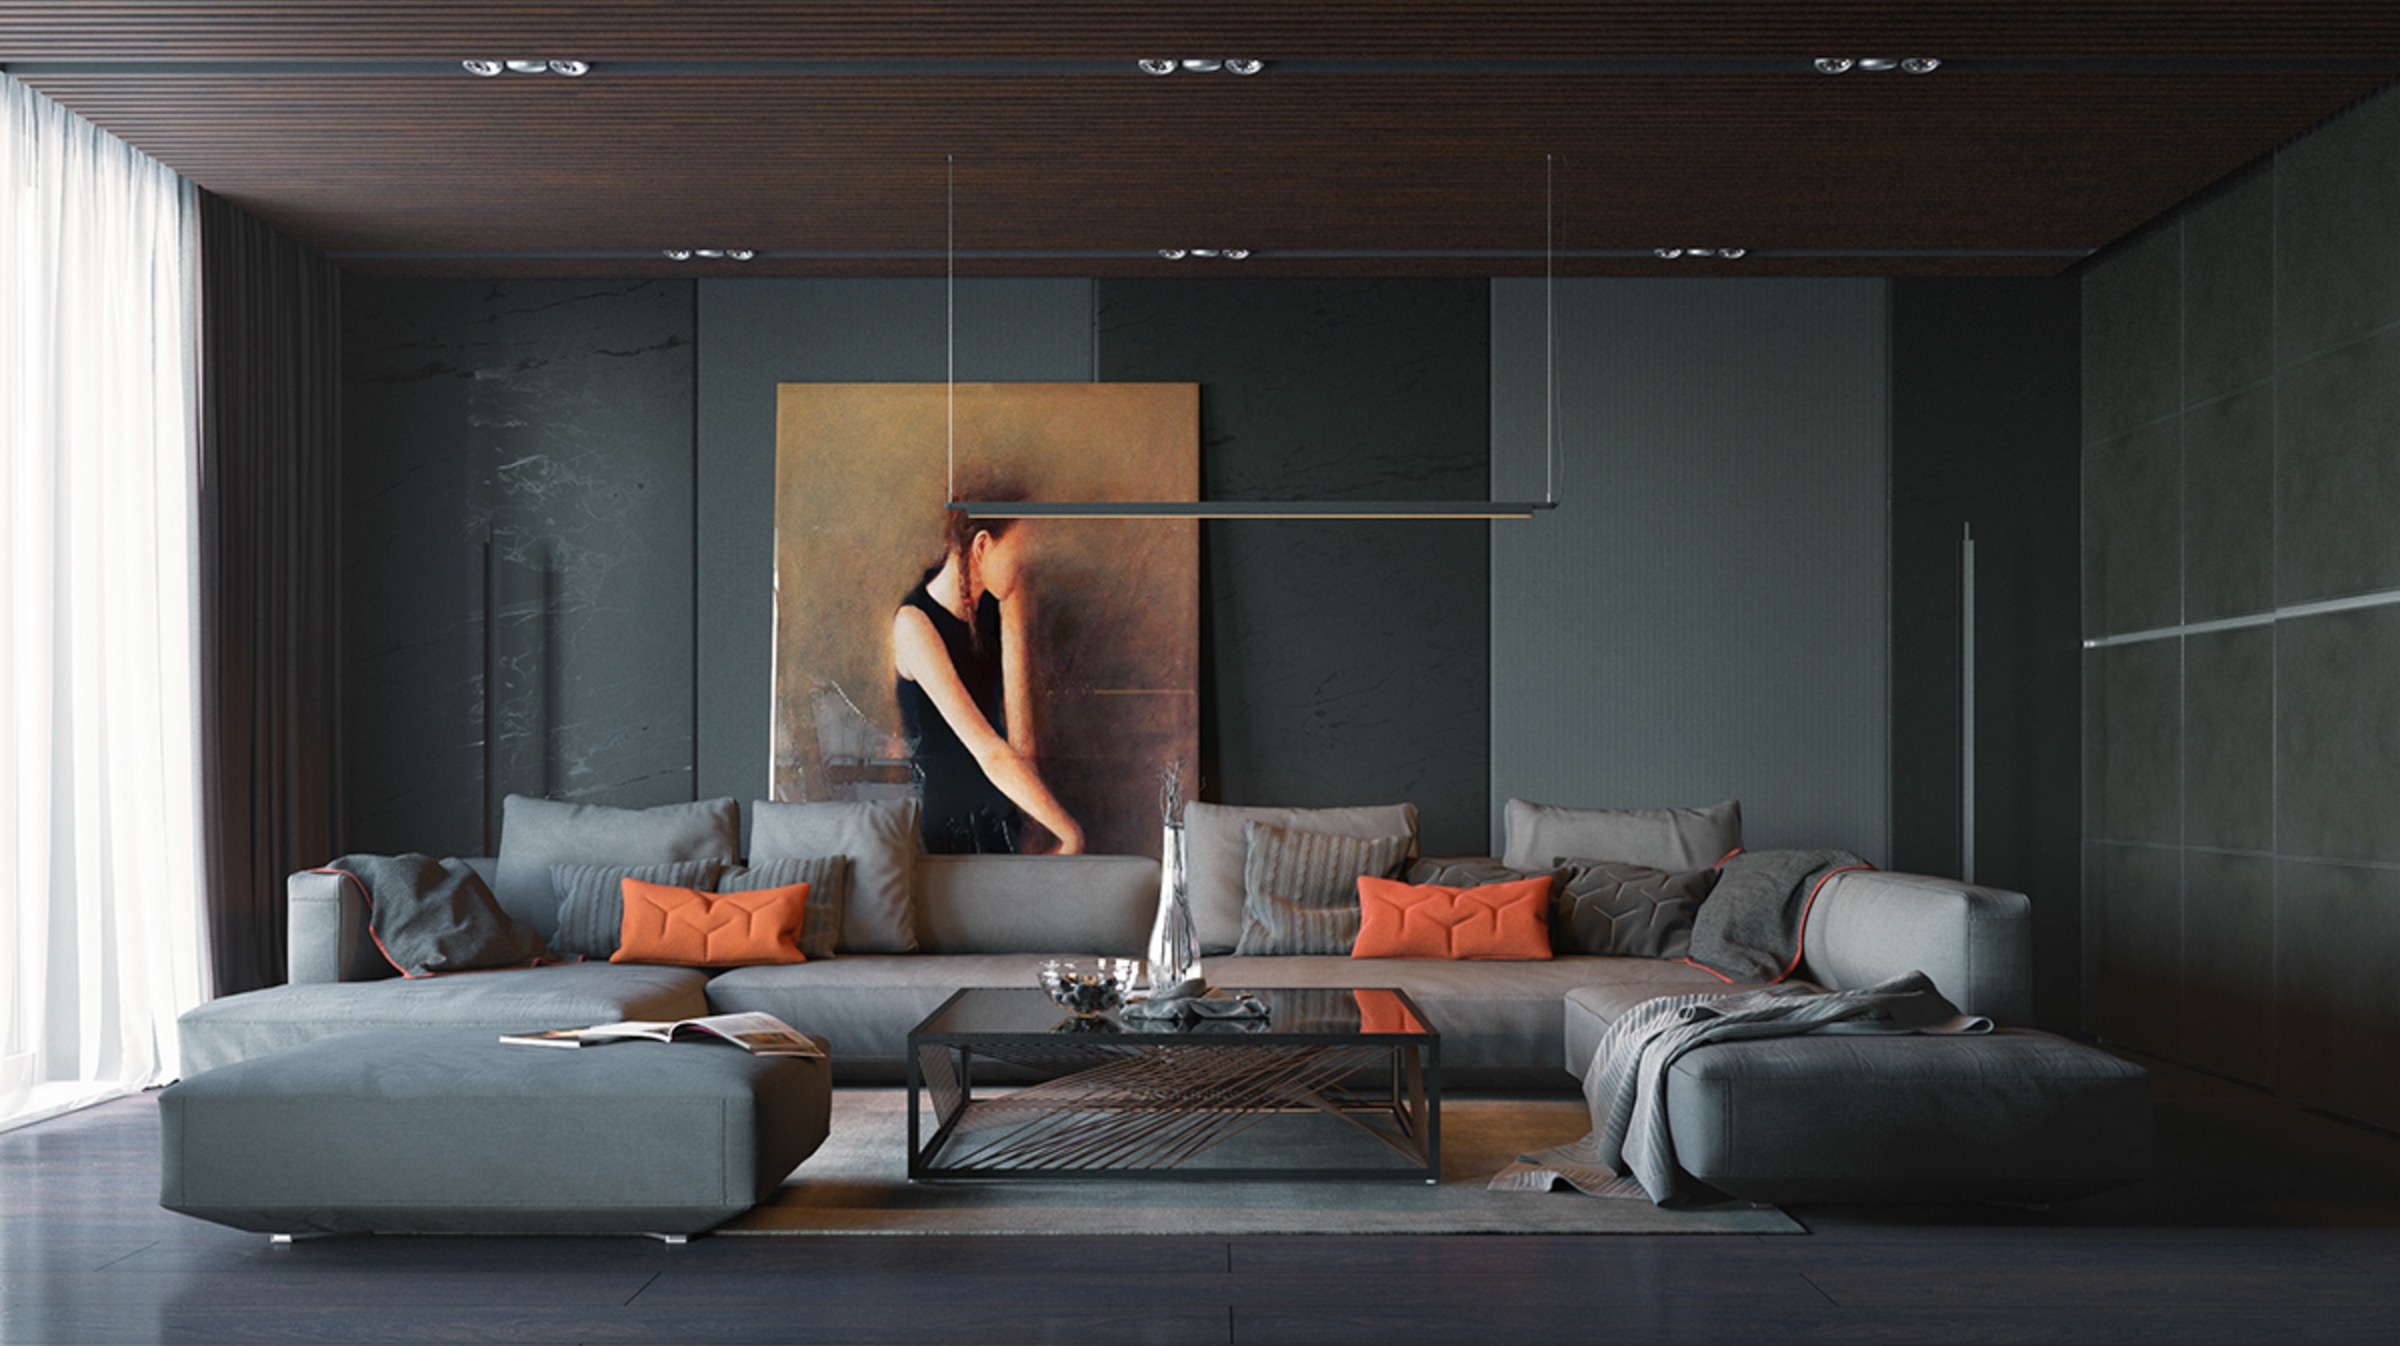 Living room with orange and black artworks "width =" 2400 "height =" 1346 "srcset =" https://mileray.com/wp-content/uploads/2016/09/orange-and-black-artwork-living-room- Svyatyuk-Stanislav.jpg 2400w, https://mileray.com/wp-content/uploads/2016/09/orange-and-black-artwork-living-room-Svyatyuk-Stanislav-300x168.jpg 300w, https: // mileray.com/wp-content/uploads/2016/09/orange-and-black-artwork-living-room-Svyatyuk-Stanislav-768x431.jpg 768w, https://mileray.com/wp-content/uploads/2016 /09/orange-and-black-artwork-living-room-Svyatyuk-Stanislav-1024x574.jpg 1024w, https://mileray.com/wp-content/uploads/2016/09/orange-and-black-artwork- Living room-Svyatyuk-Stanislav-696x390.jpg 696w, https://mileray.com/wp-content/uploads/2016/09/orange-and-black-artwork-living-room-Svyatyuk-Stanislav-1068x599.jpg 1068w, https://mileray.com/wp-content/uploads/2016/09/orange-and-black-artwork-living-room-Svyatyuk-Stanislav-749x420.jpg 749w "sizes =" (maximum width: 2400px) 100vw, 2400px